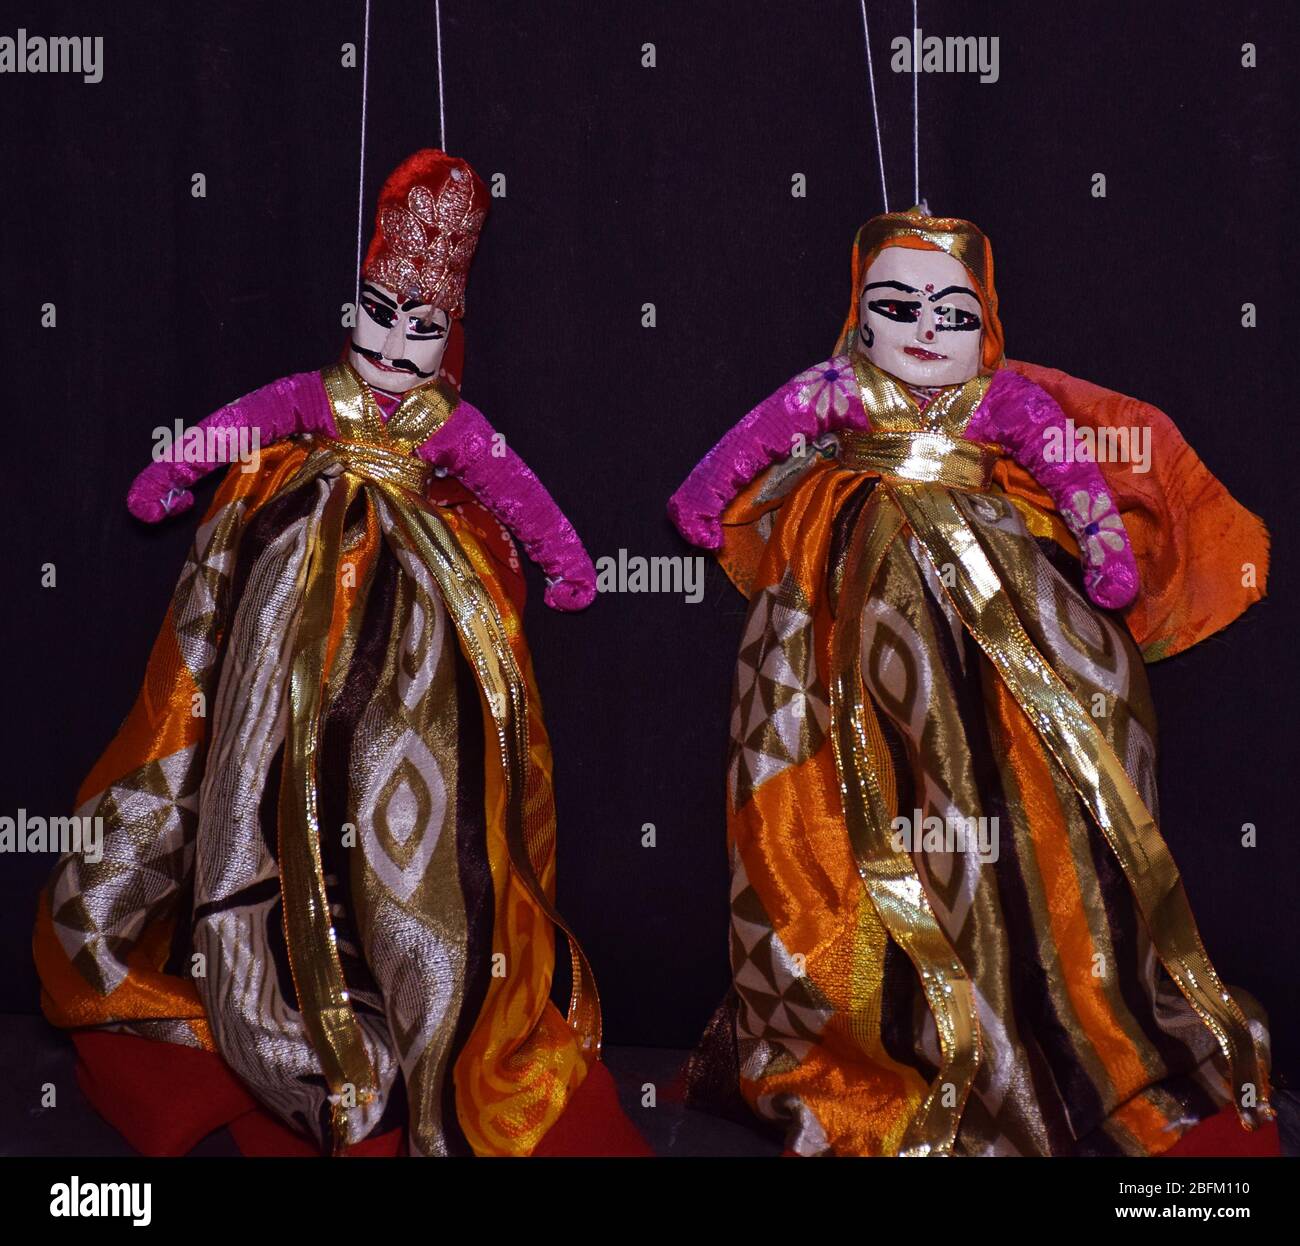 Rajasthani Kathputli or Puppets isolated on a dark background. Indian Rajasthan wooden Puppets are also referred as Kathputli in Hindi Language Stock Photo